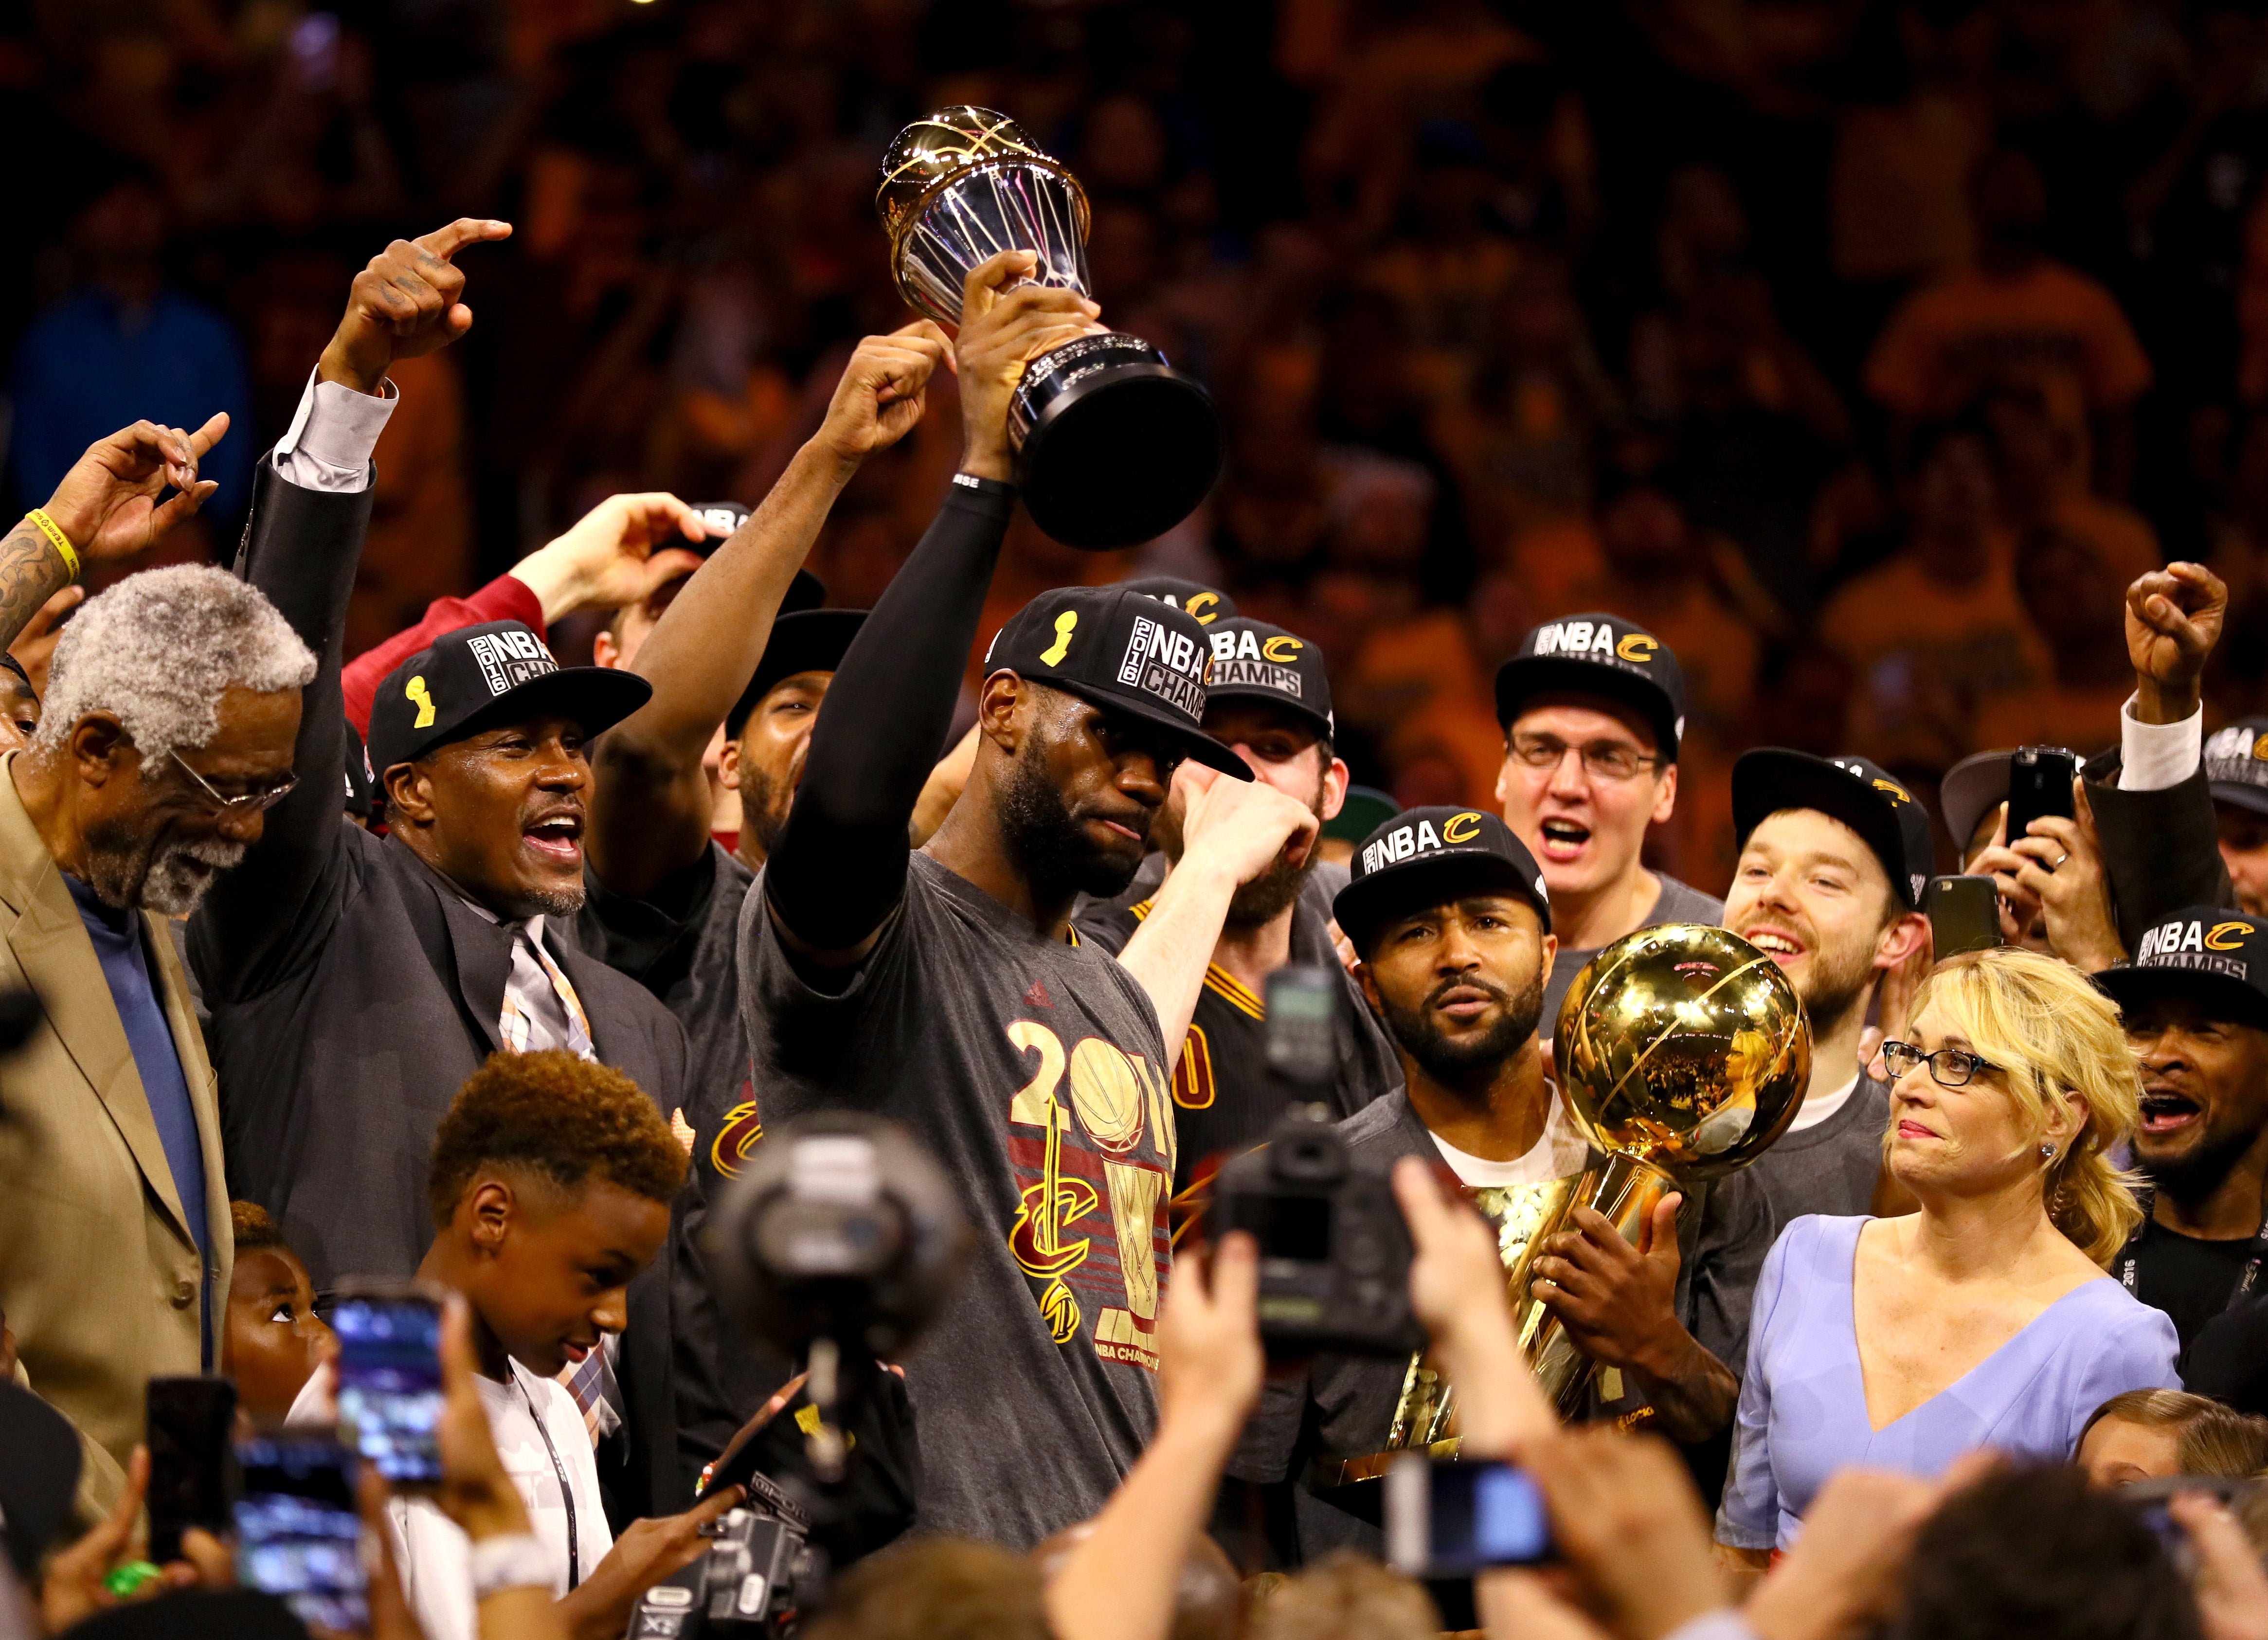 Where are the 2016 NBA Champion Cleveland Cavalier now